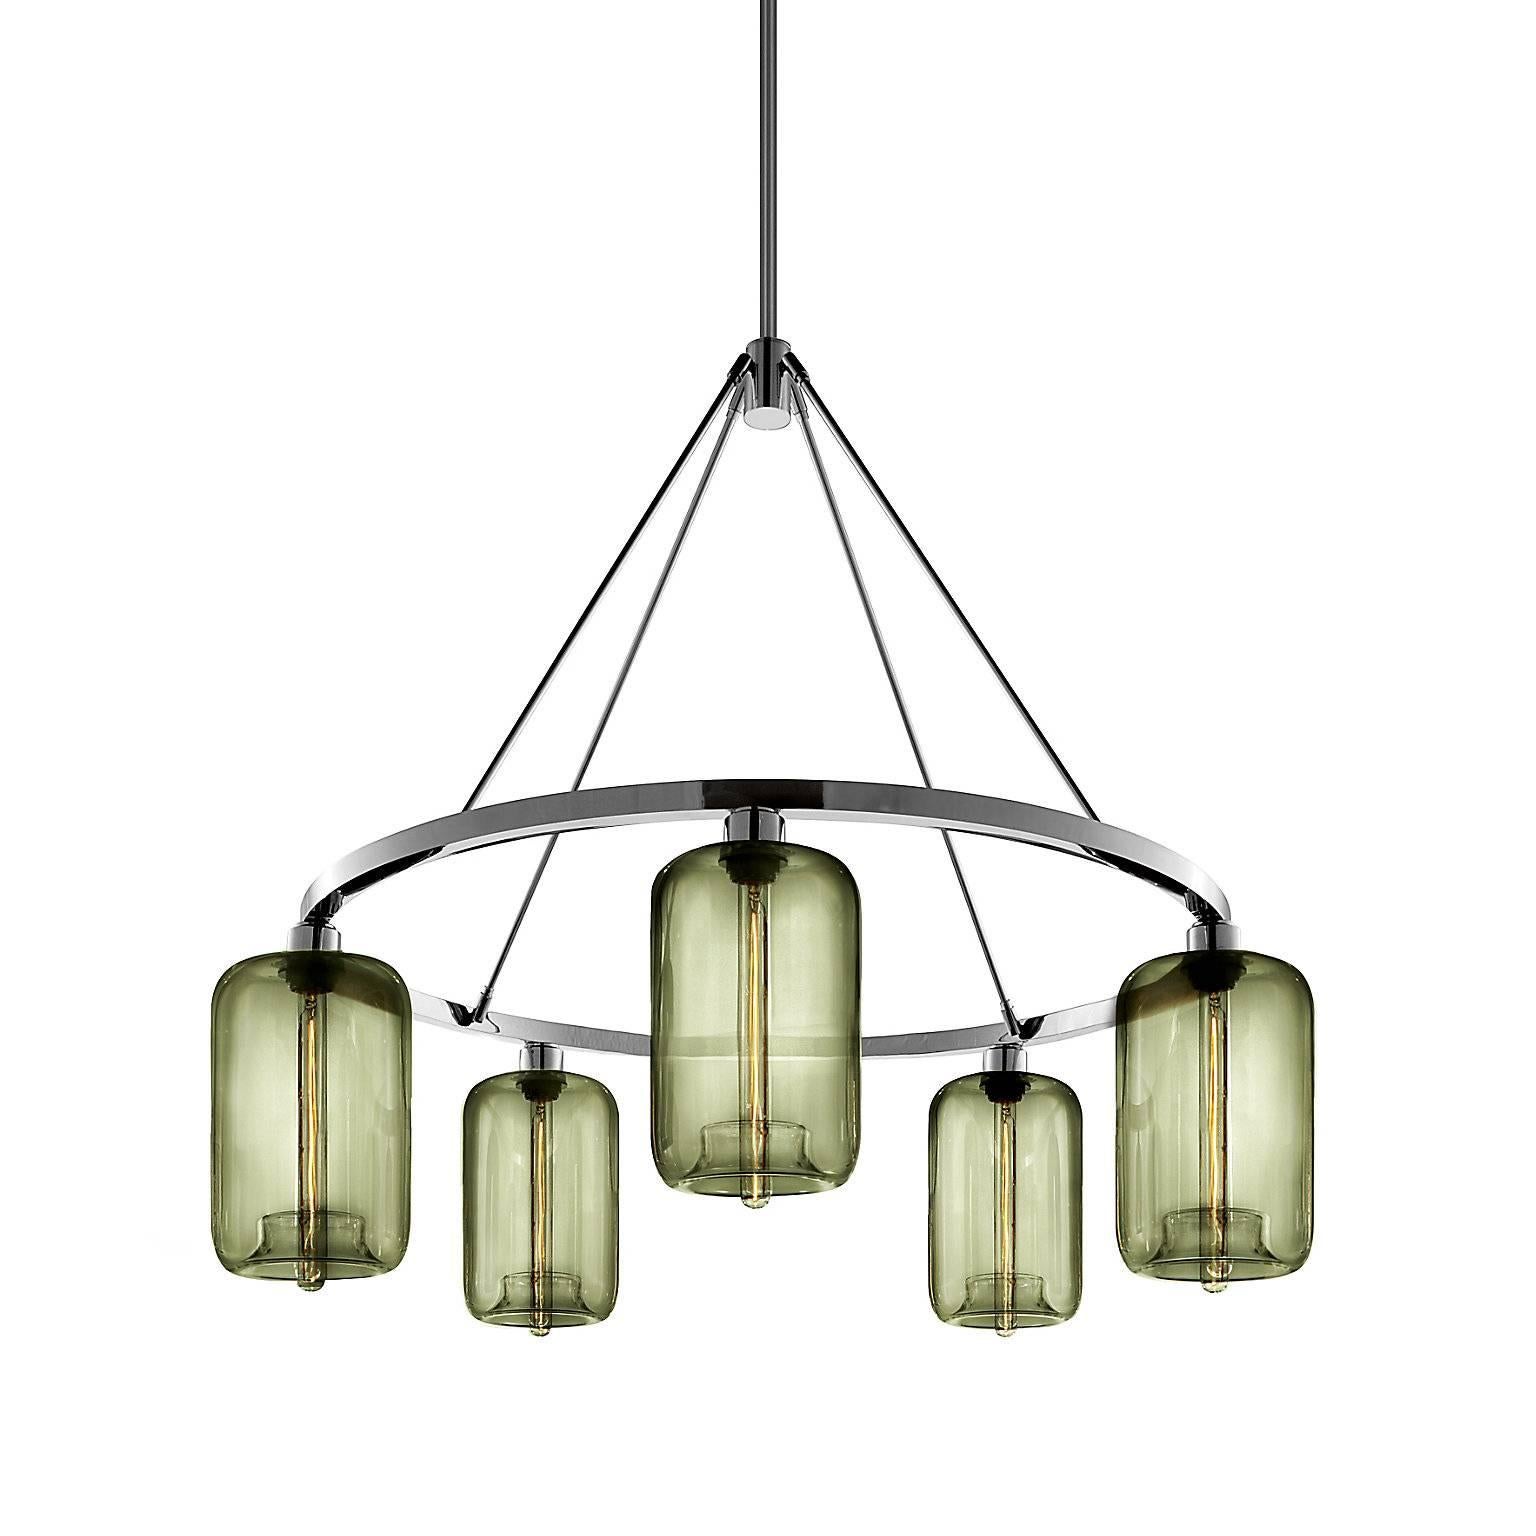 A statement piece designed to attract attention to the brilliant Pod pendant, this chandelier captivates as it suspends elegant hand-blown shades. Every single glass light that comes from Niche is handblown by real human beings in a state-of-the-art